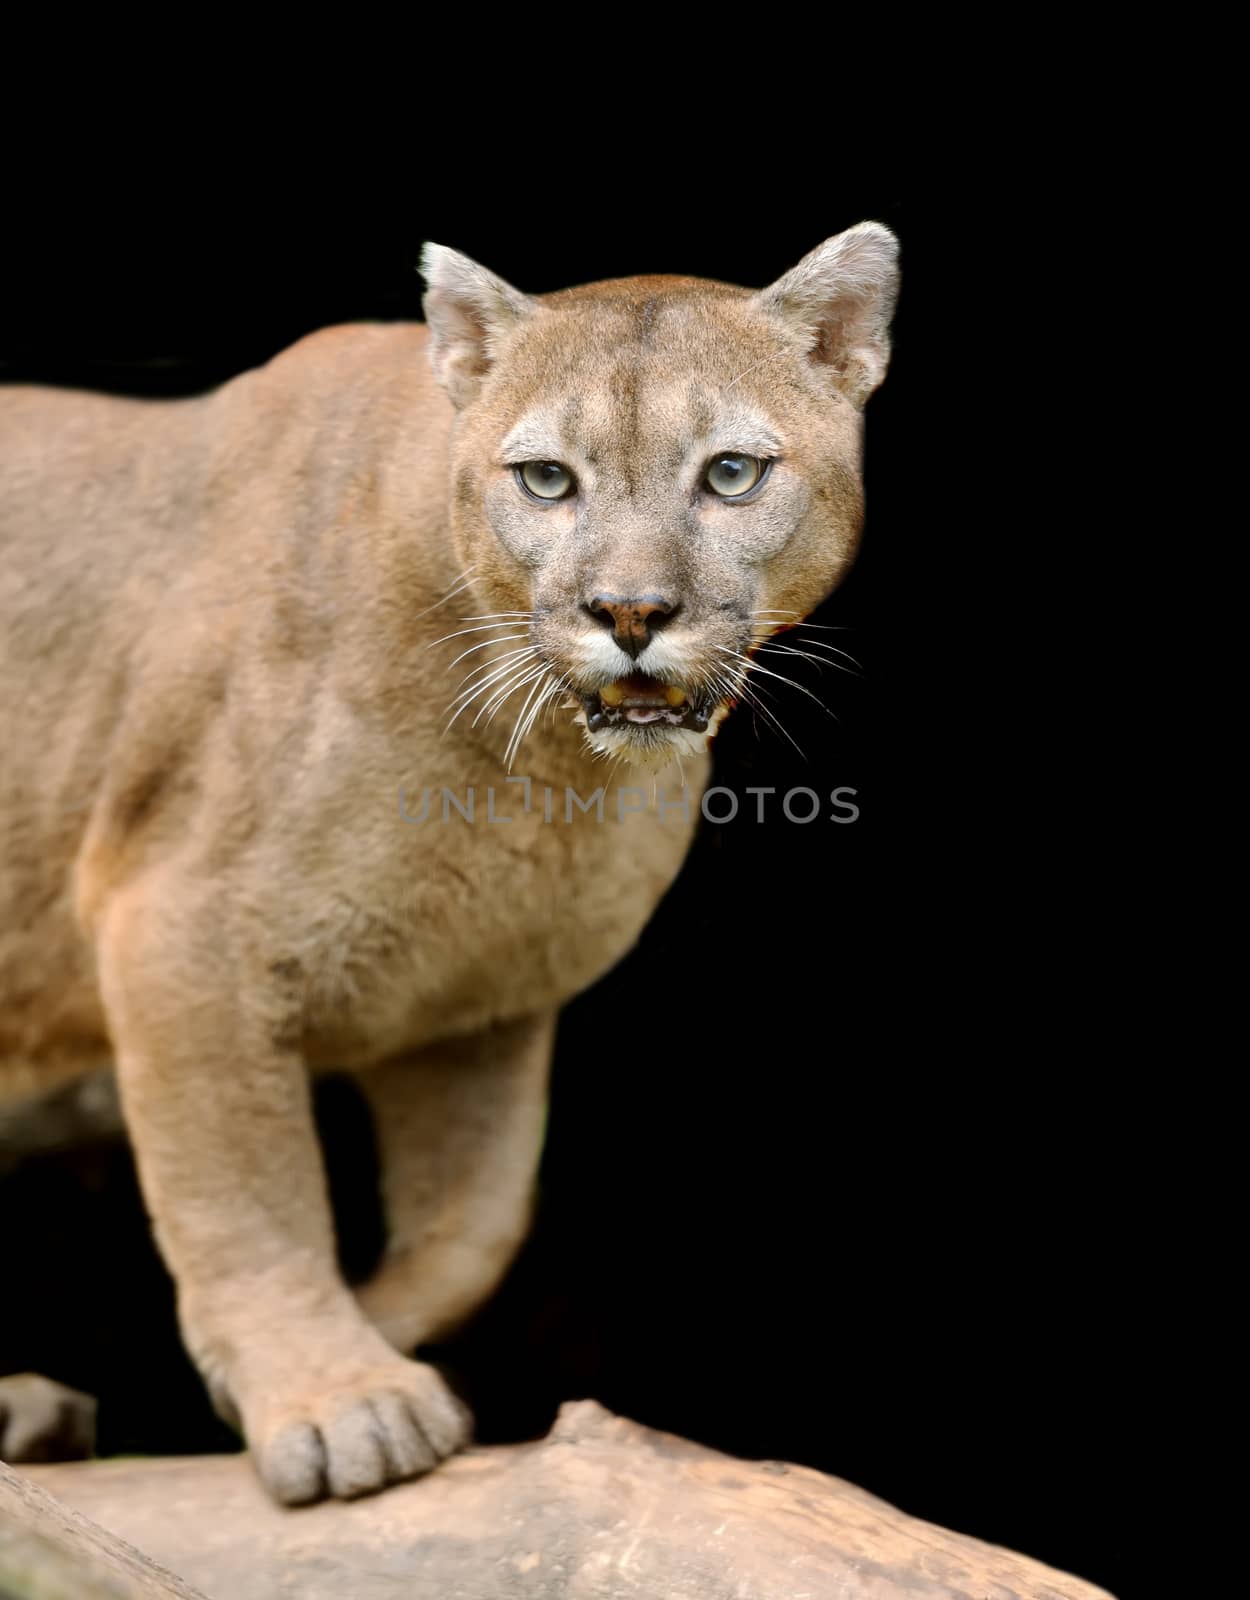 Cougar is on a branch against a dark background